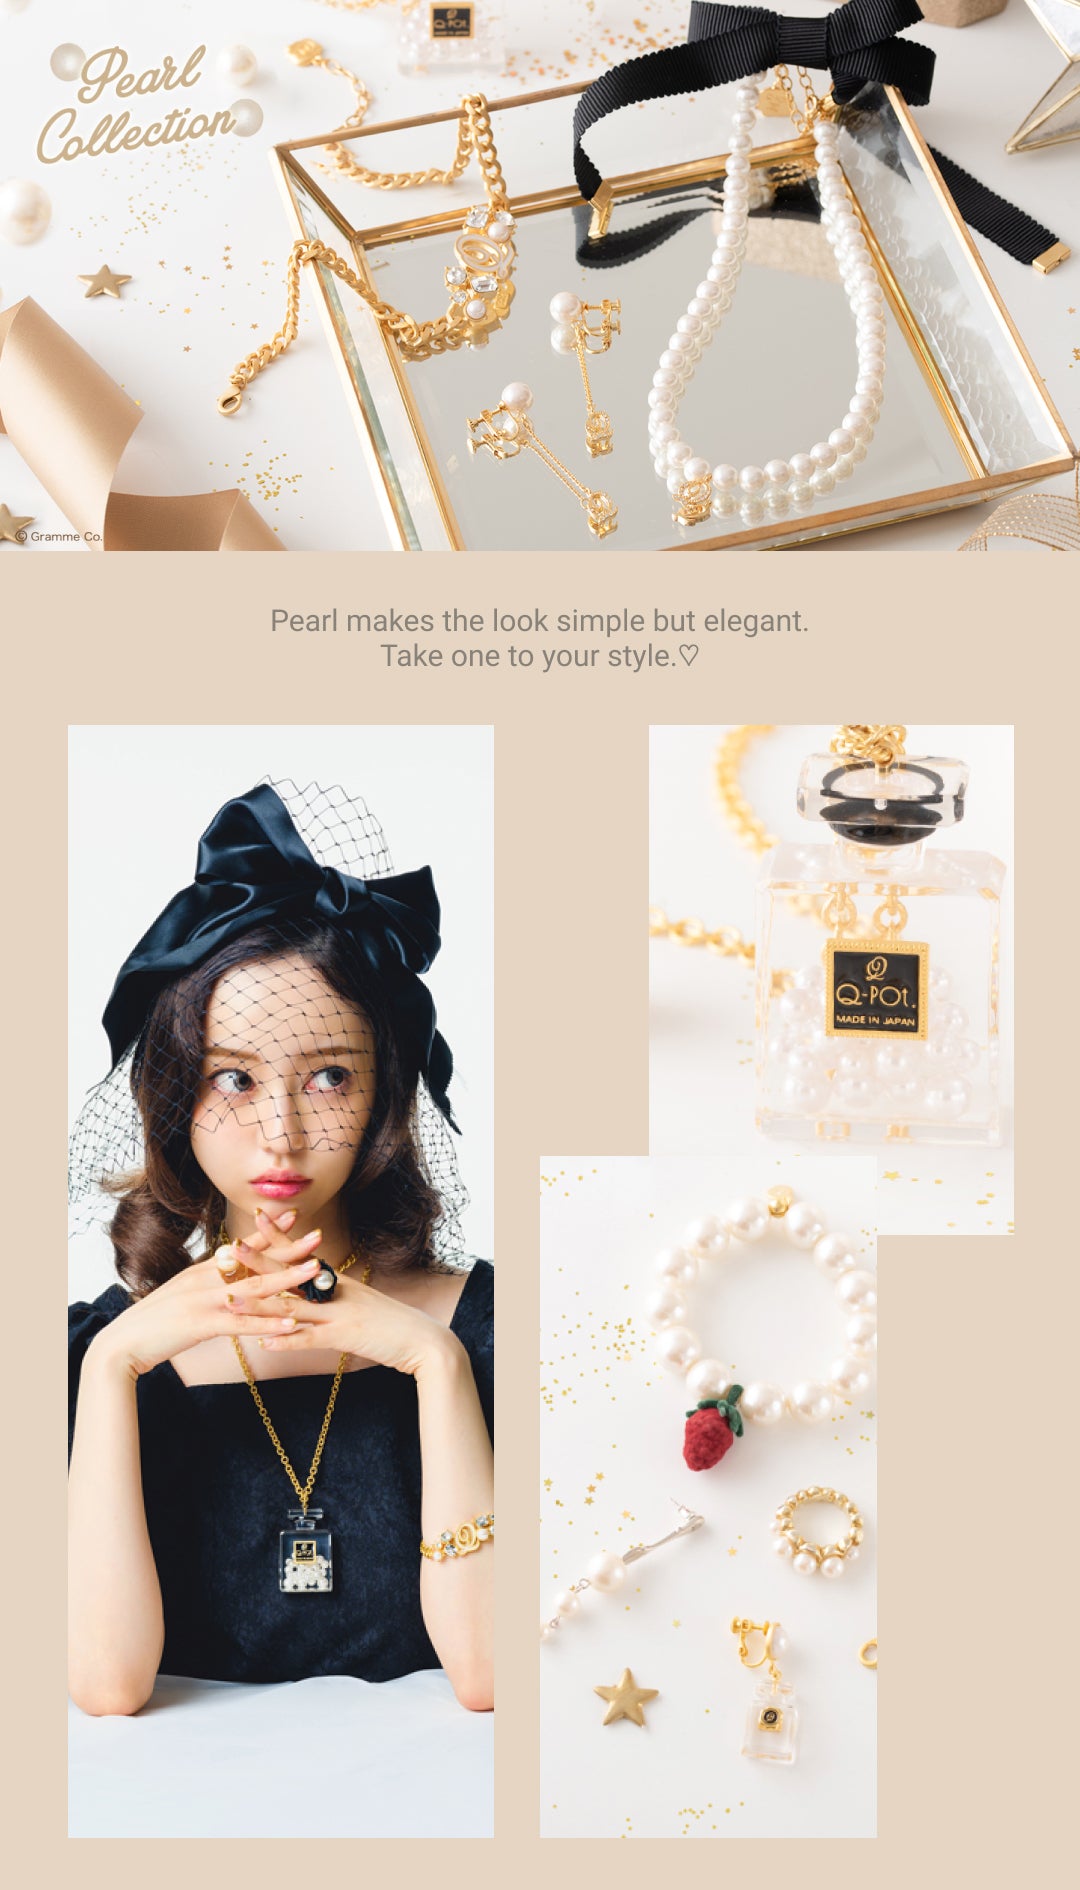 Pearl Collection - Q-pot. is the first Japan sweets jewelry brand.